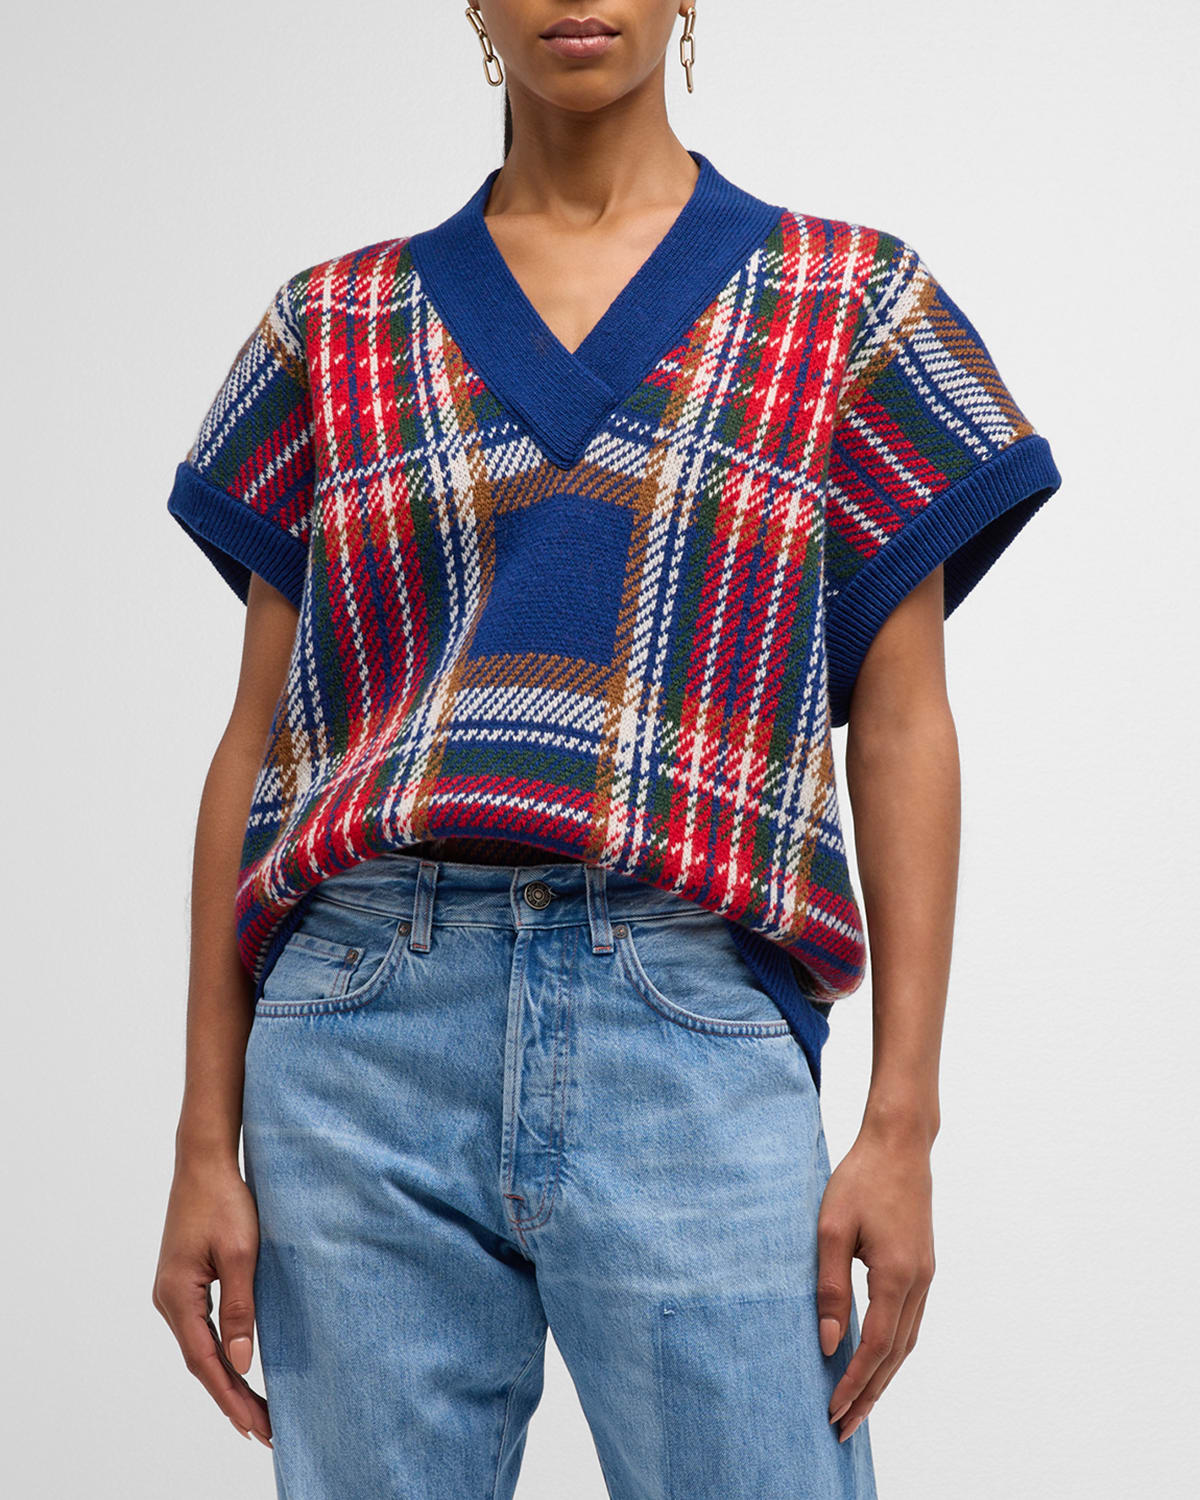 MADE IN TOMBOY GILETTE PLAID SWEATER VEST